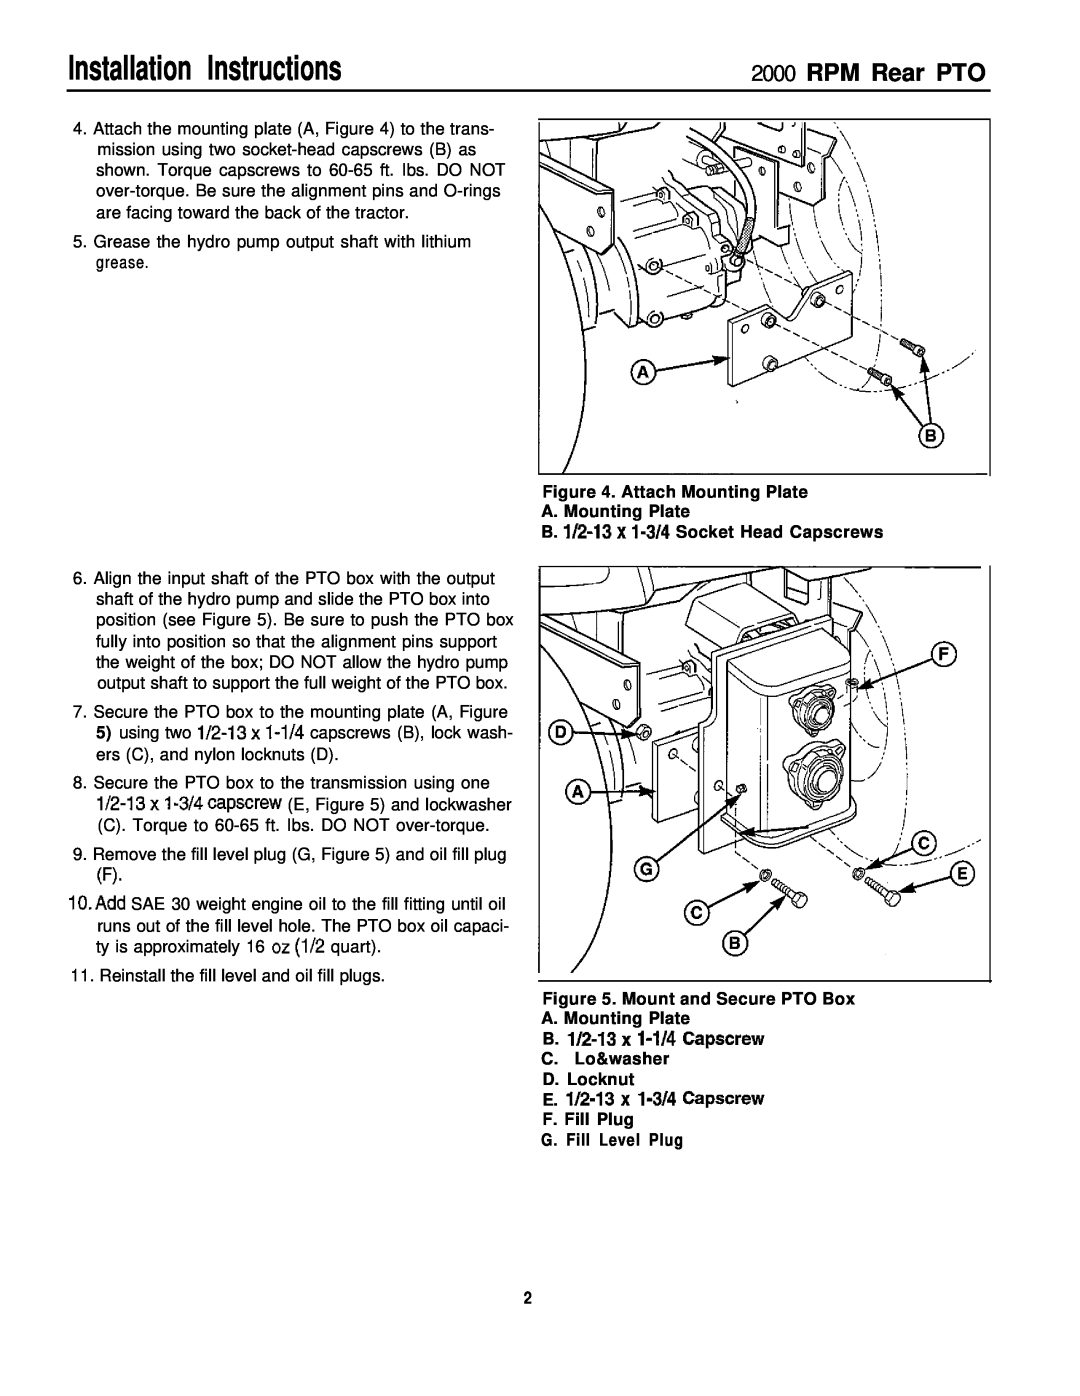 Simplicity 2900 Series RPM Rear PTO, Attach Mounting Plate A. Mounting Plate, B. 112-13x l-314Socket Head Capscrews 